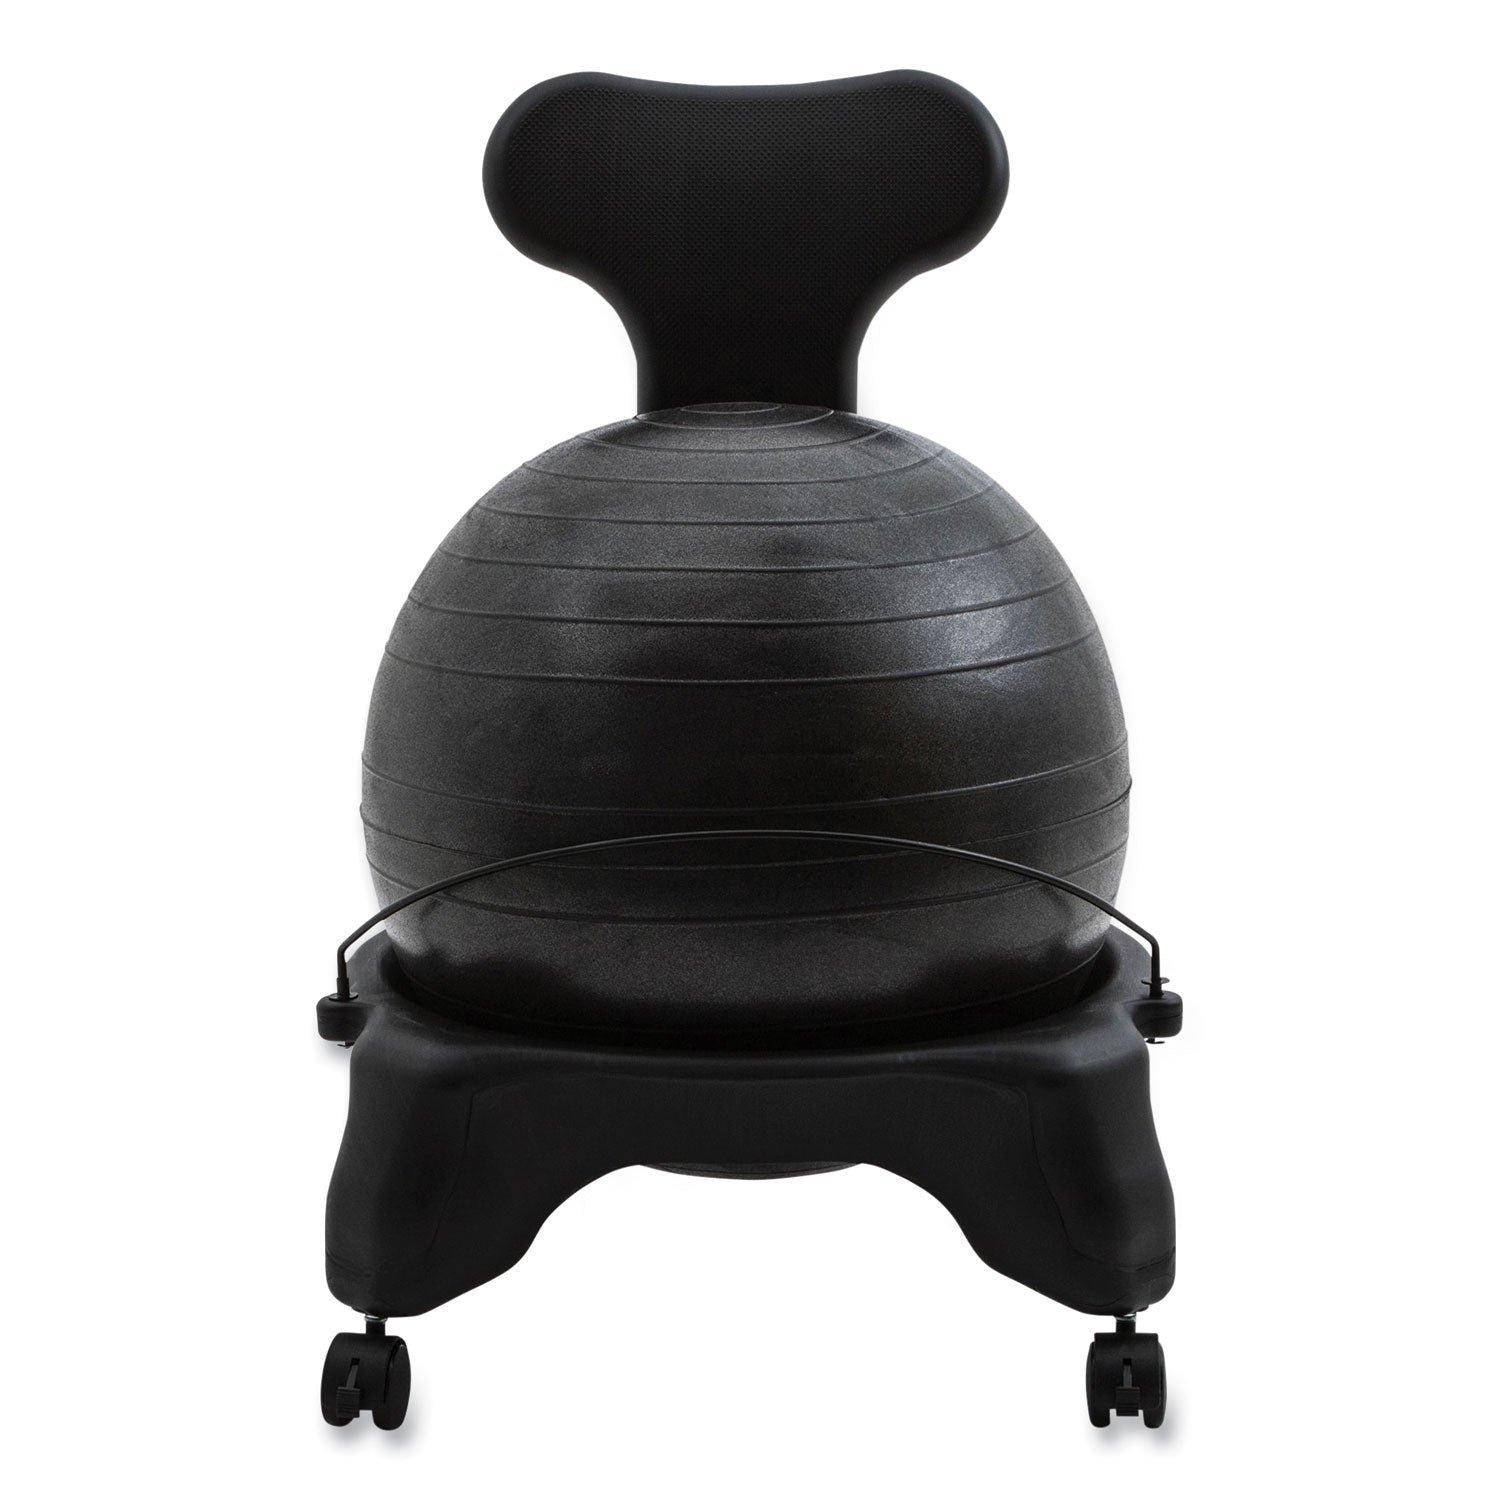 fitpro-ball-chair-supports-up-to-200-lb-gray_csibchx - 5